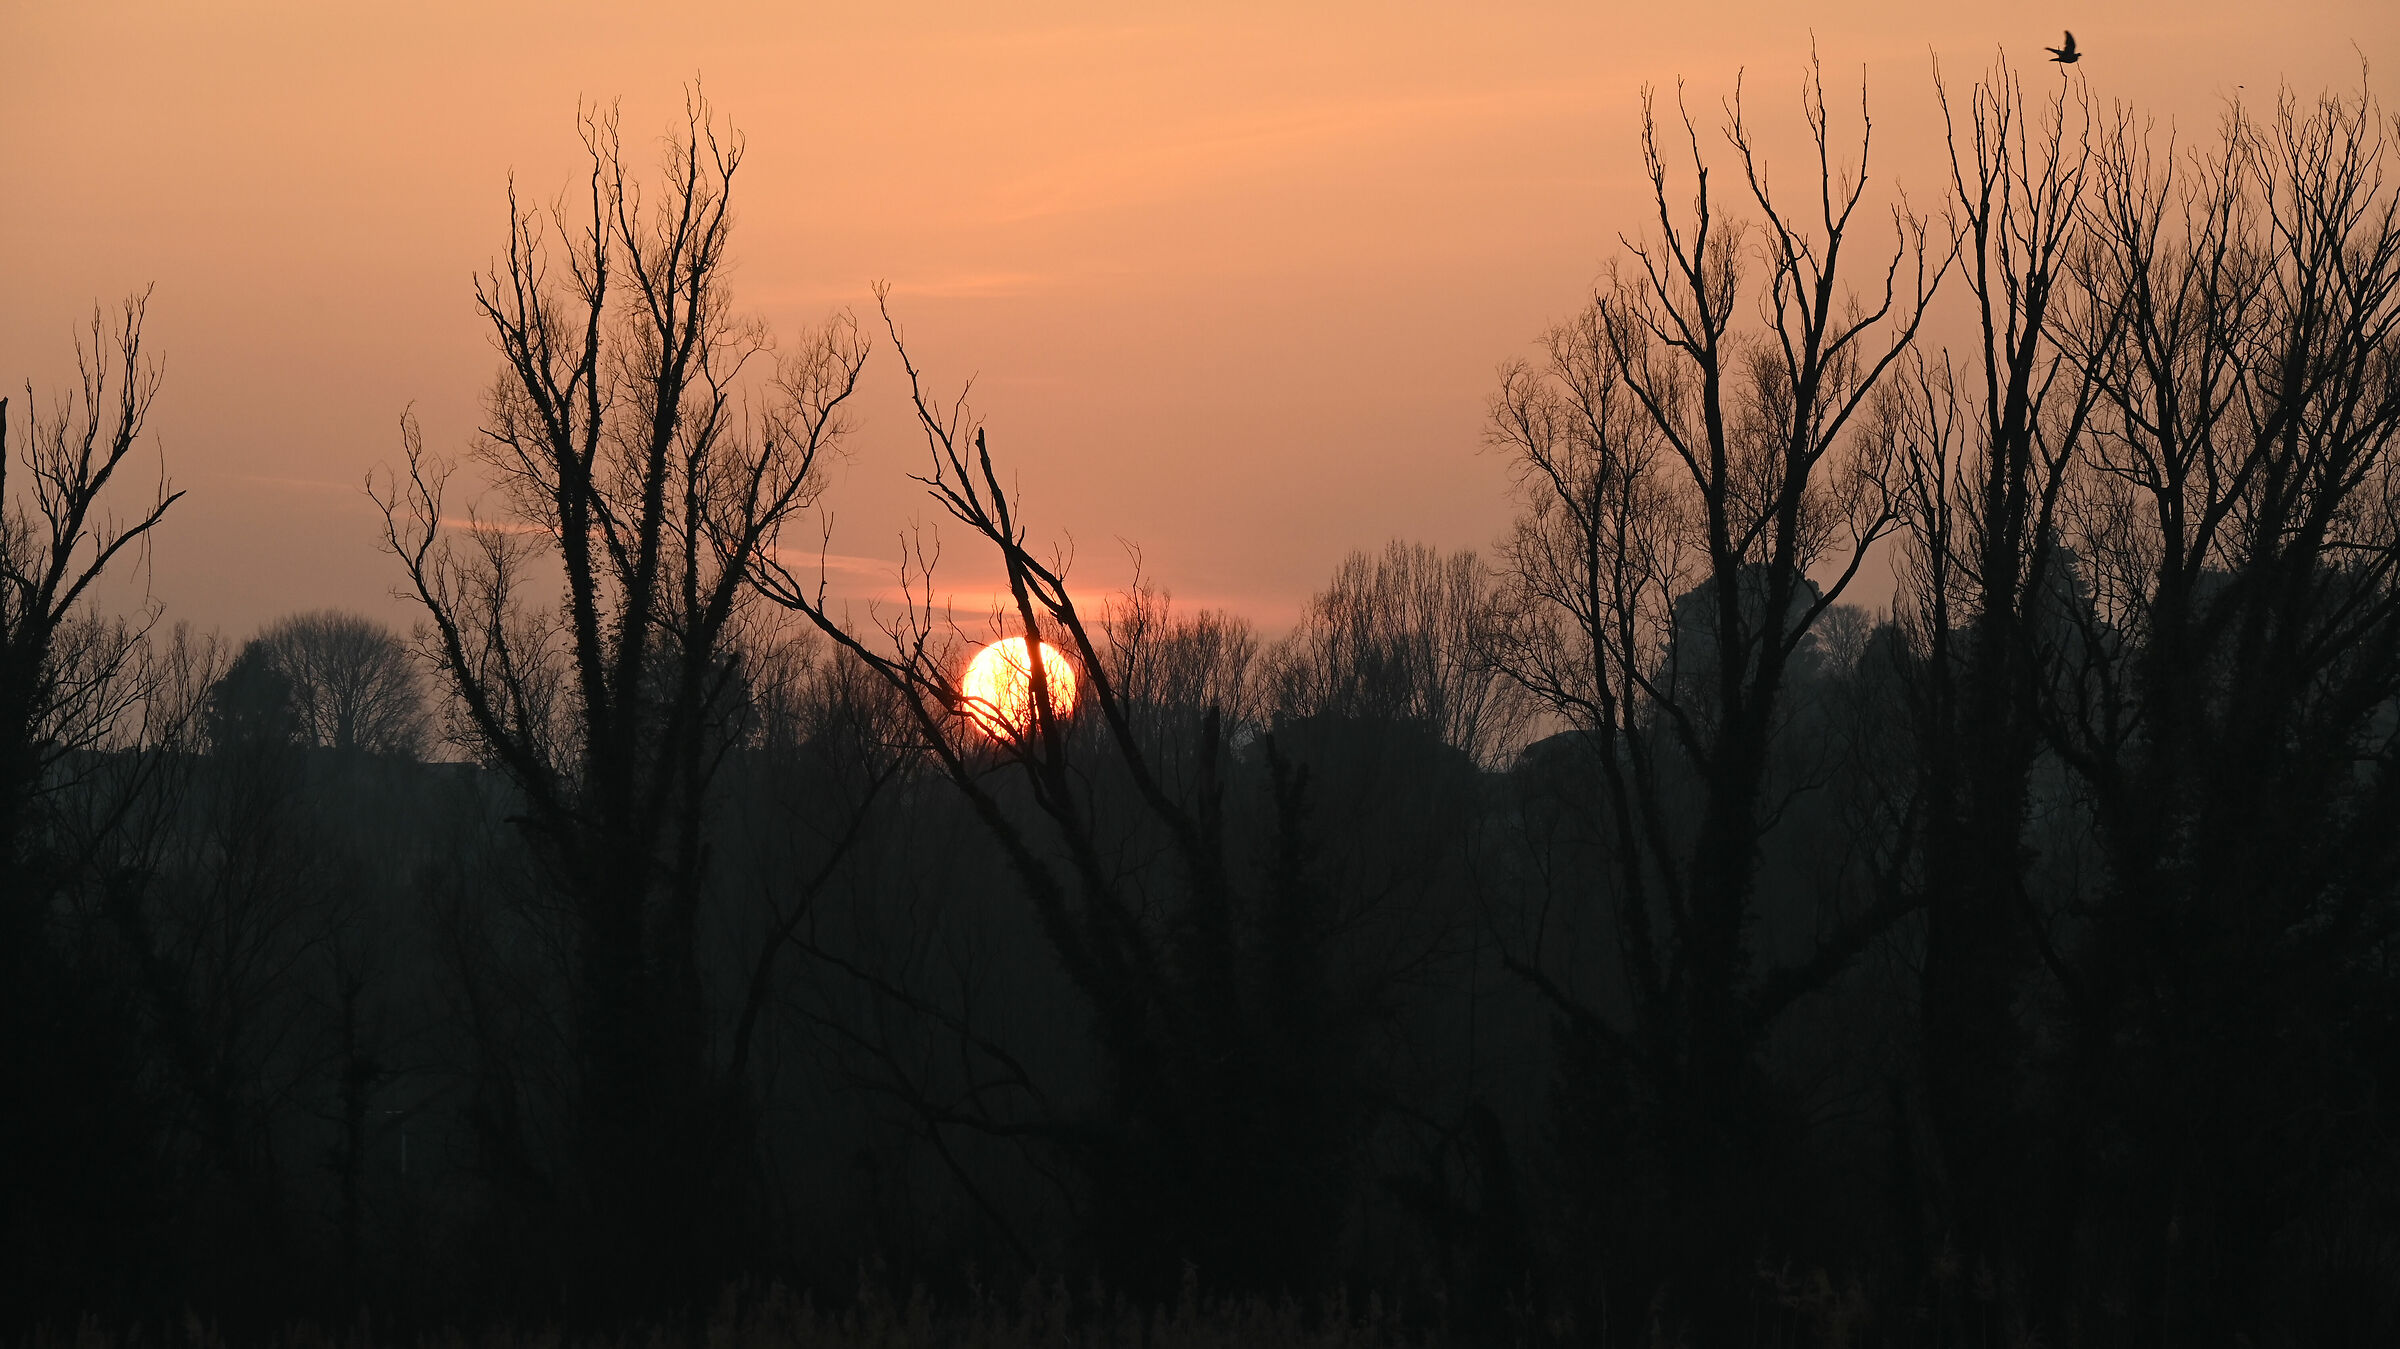 Winter sunset in the Lombardy countryside 2...